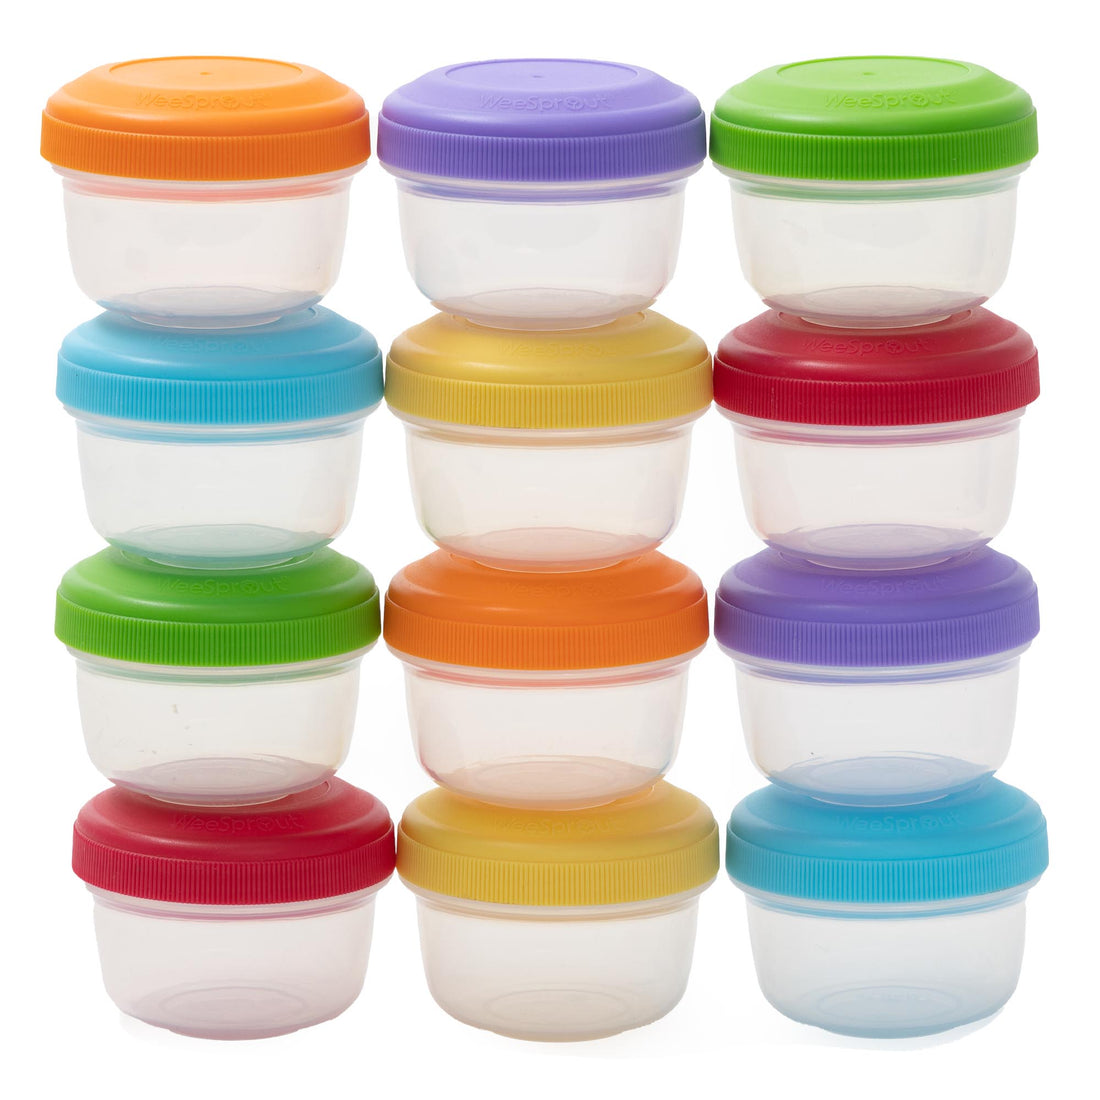 Get Lock & Lock Baby Food Container, Sealed Storage Box Yellow